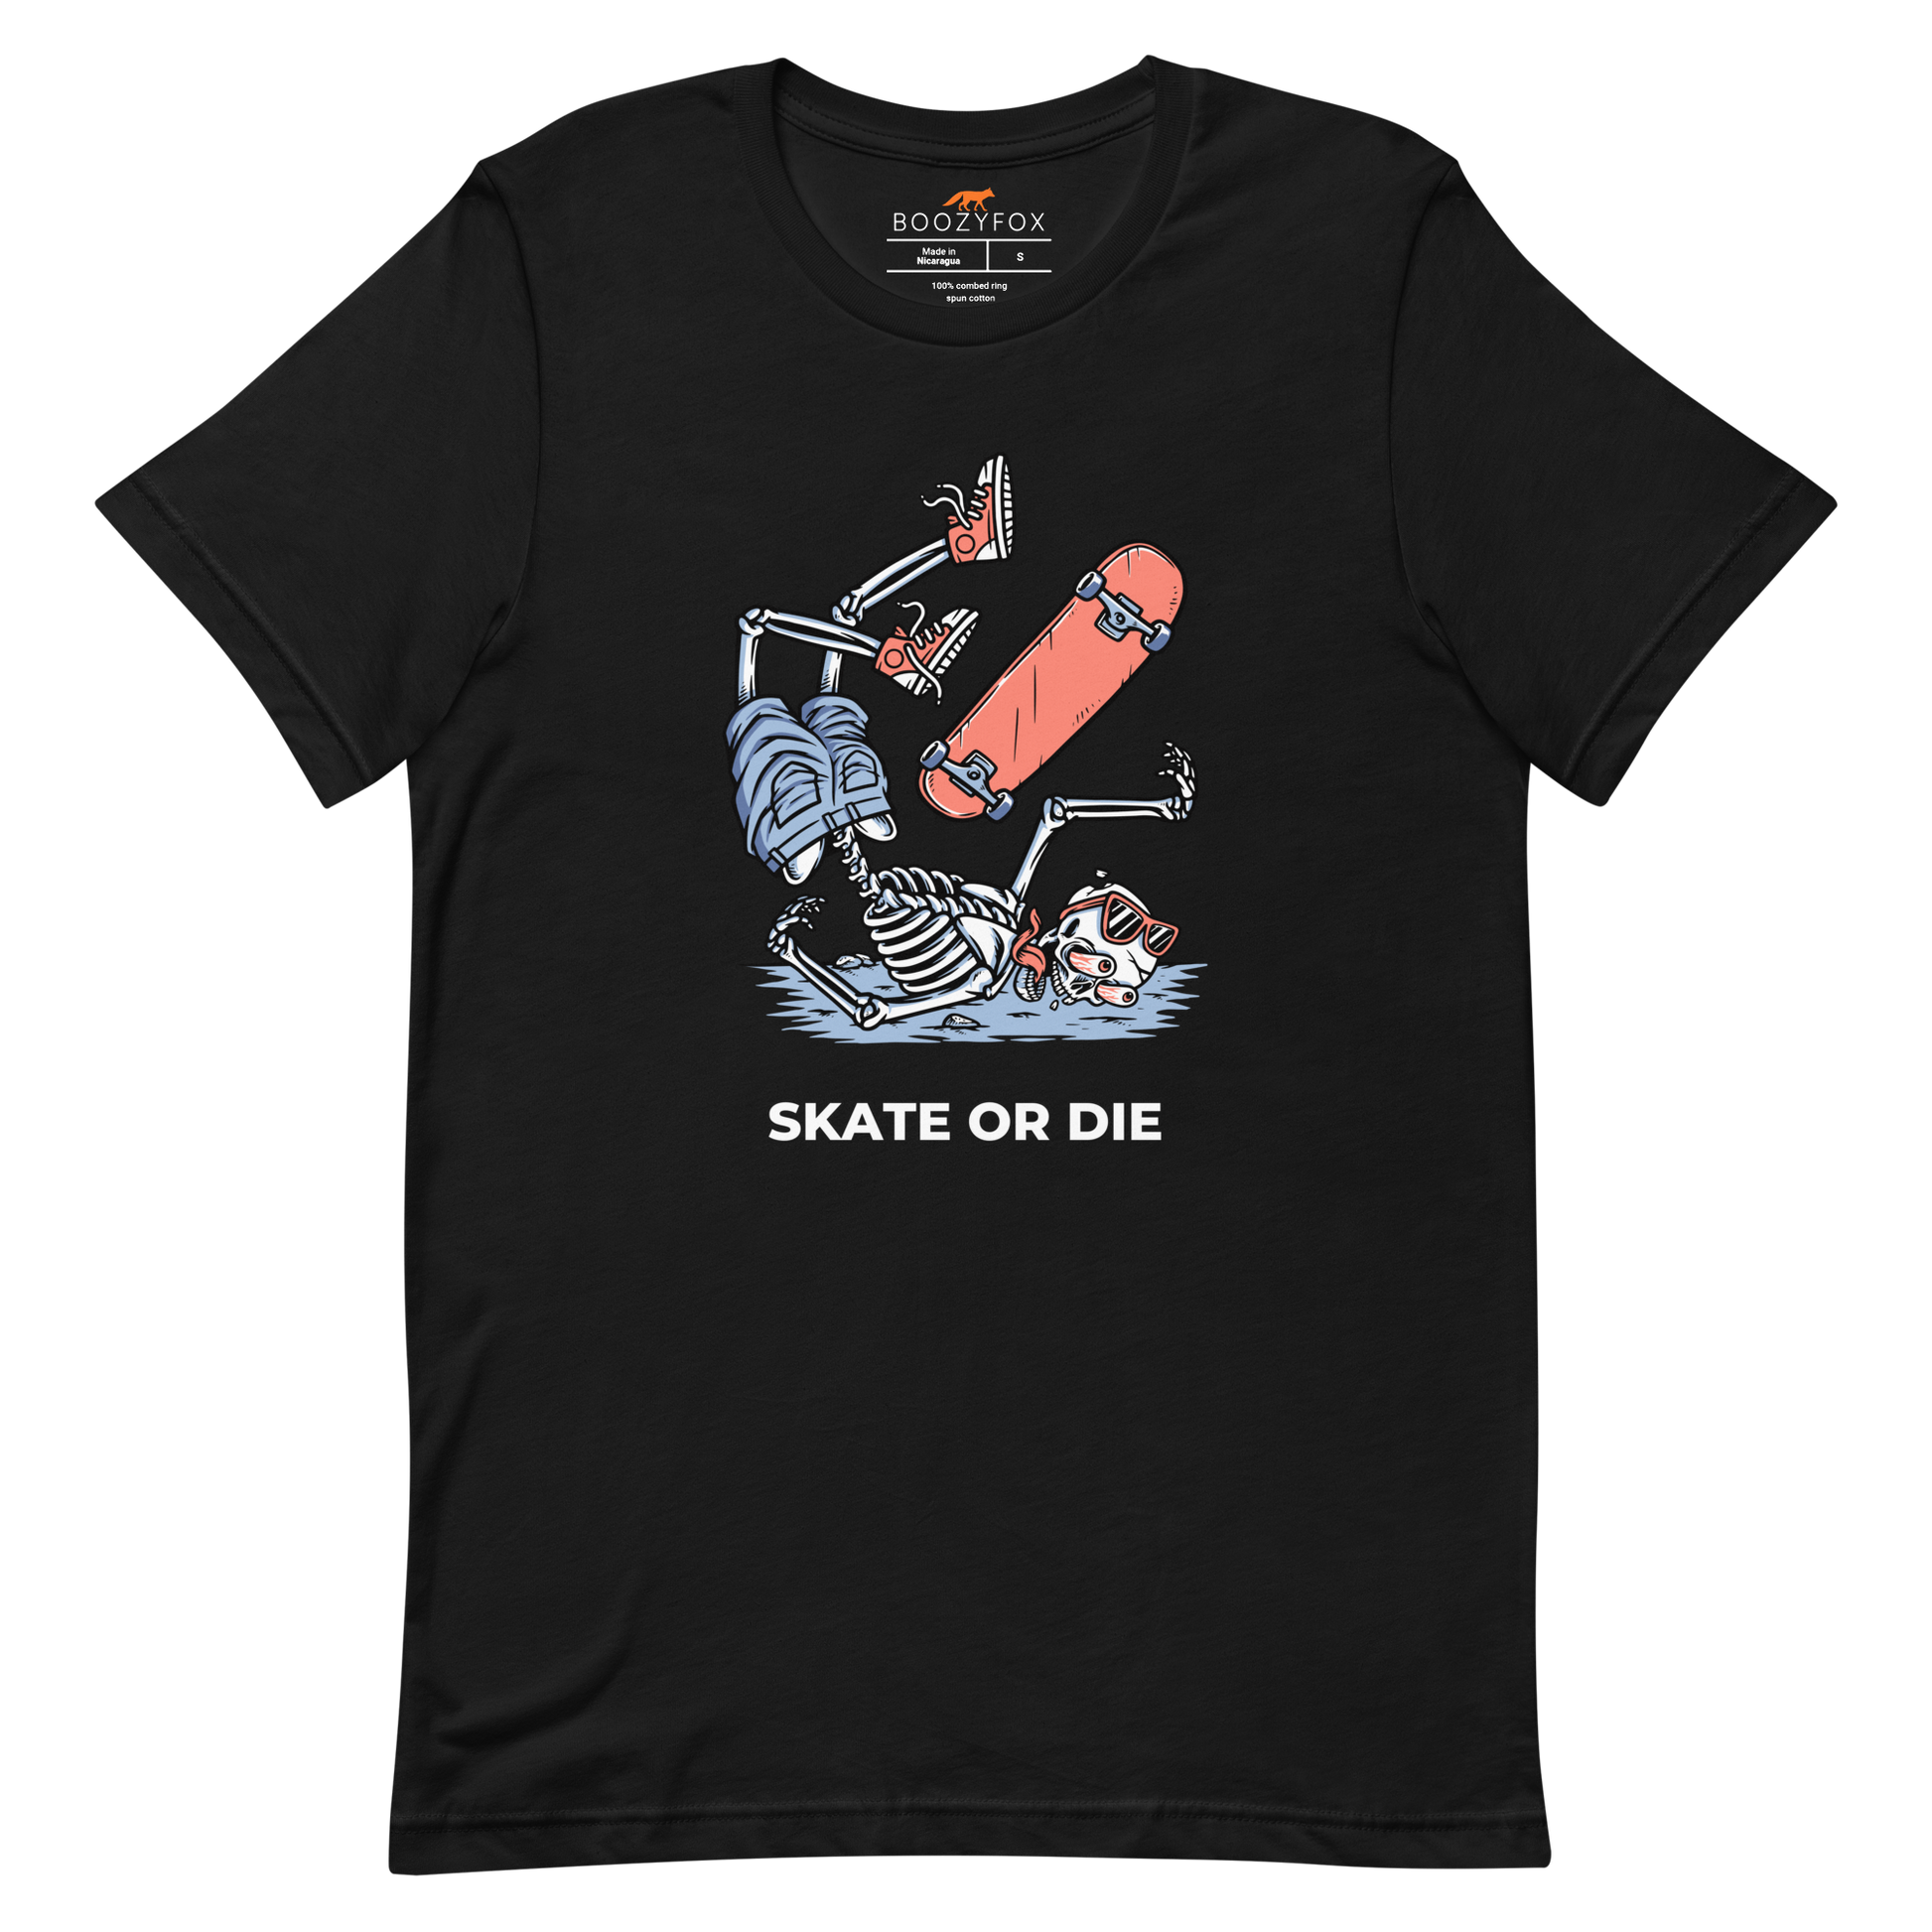 Black Premium Skate or Die Tee featuring a daring Skeleton Falling While Skateboarding graphic on the chest - Funny Graphic Skeleton Tees - Boozy Fox